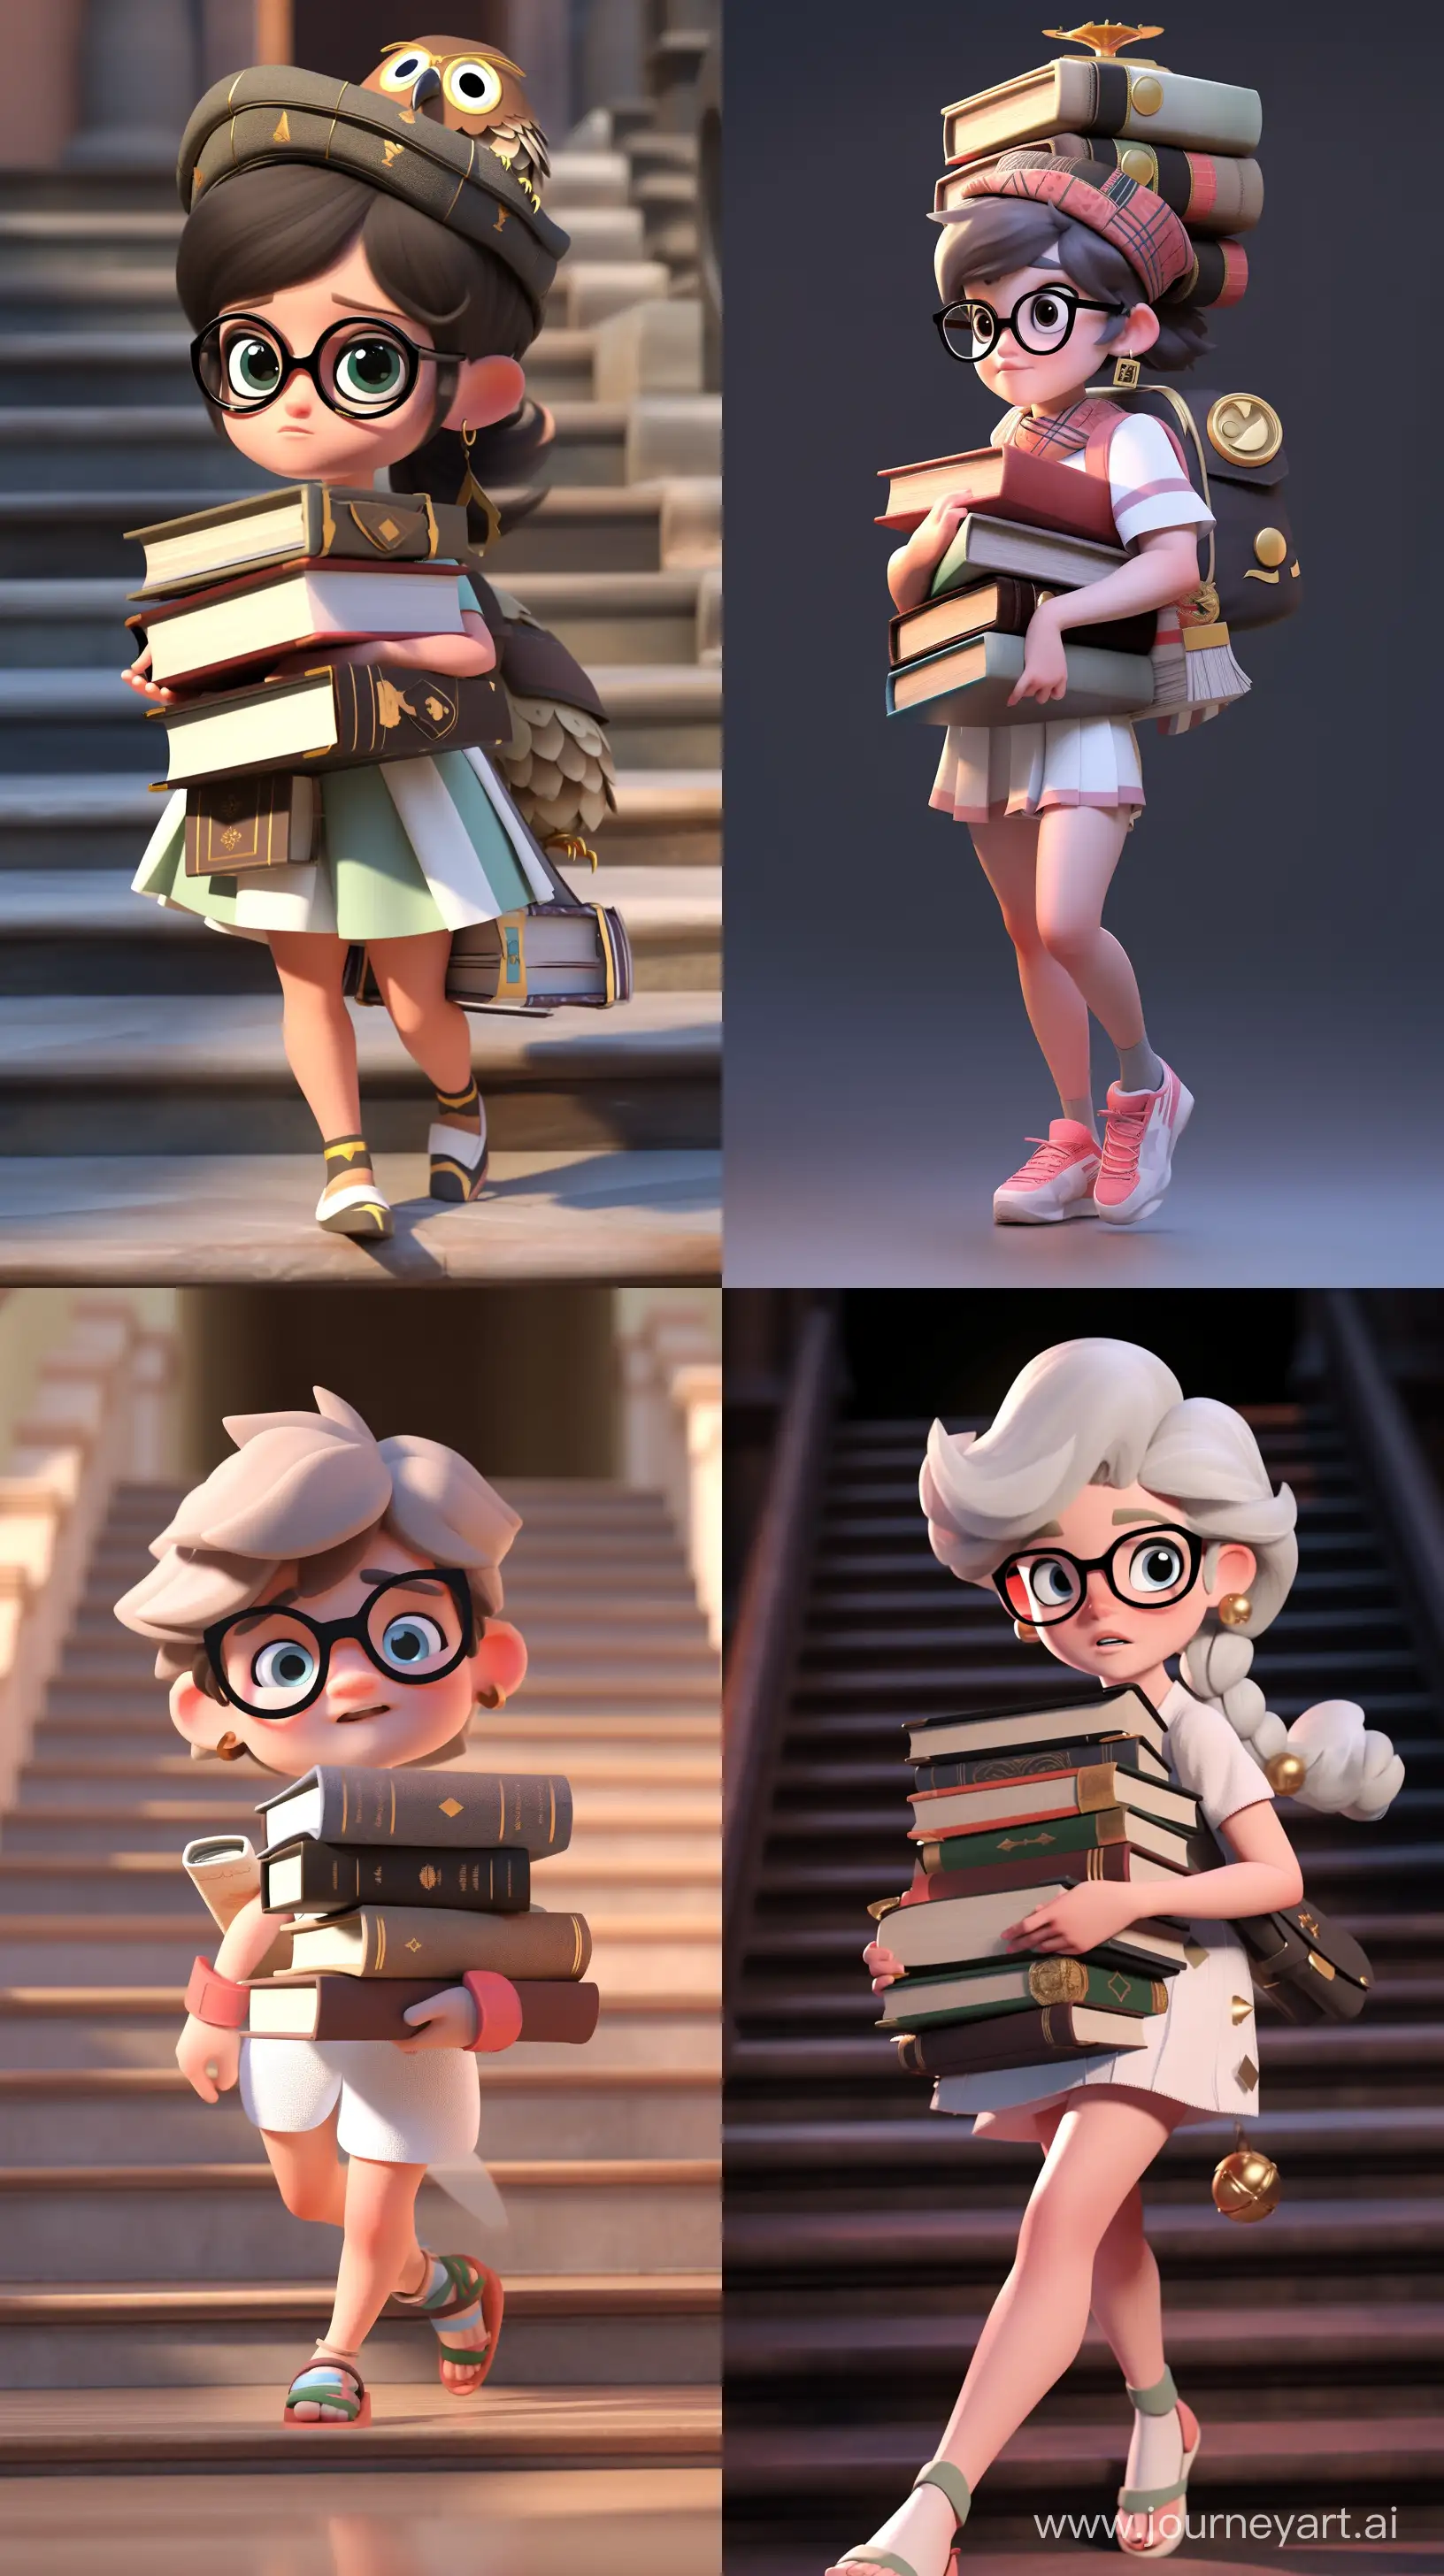 athena being a scholar student wearing glasses and carrying books, 3D animation, pixar style --niji --ar 9:16